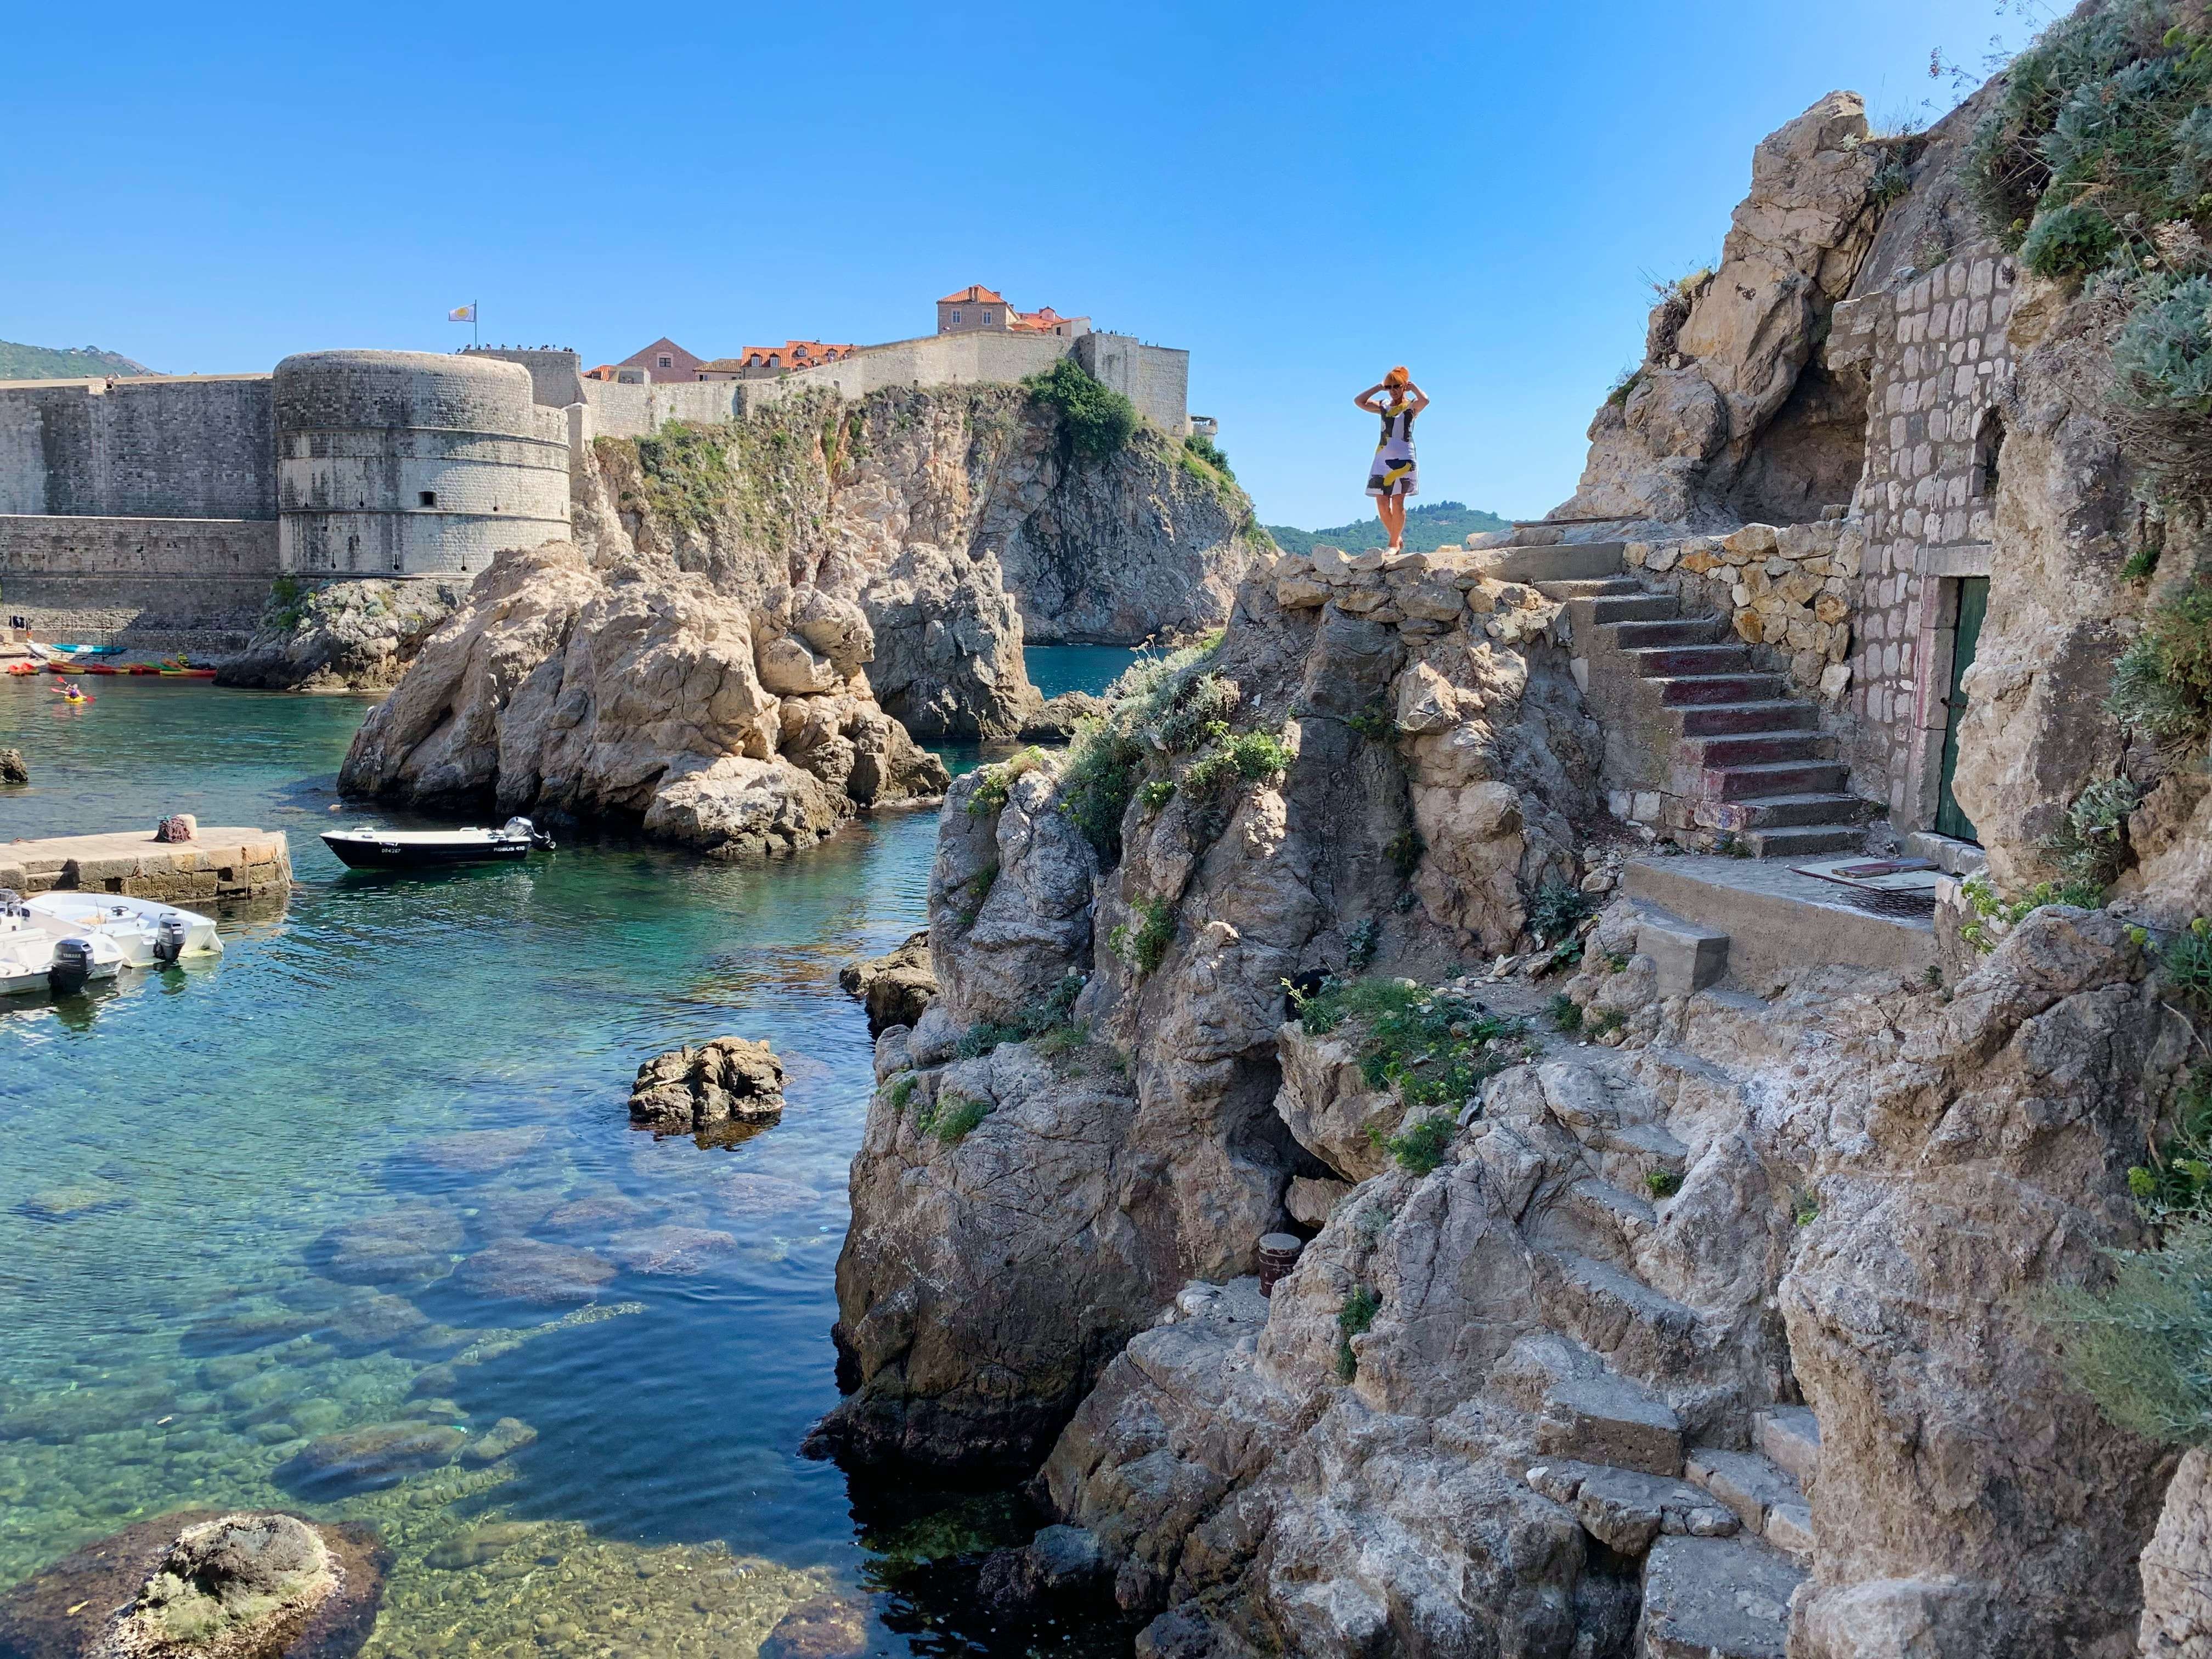 Ancient Wonders and Wellness in Dubrovnik